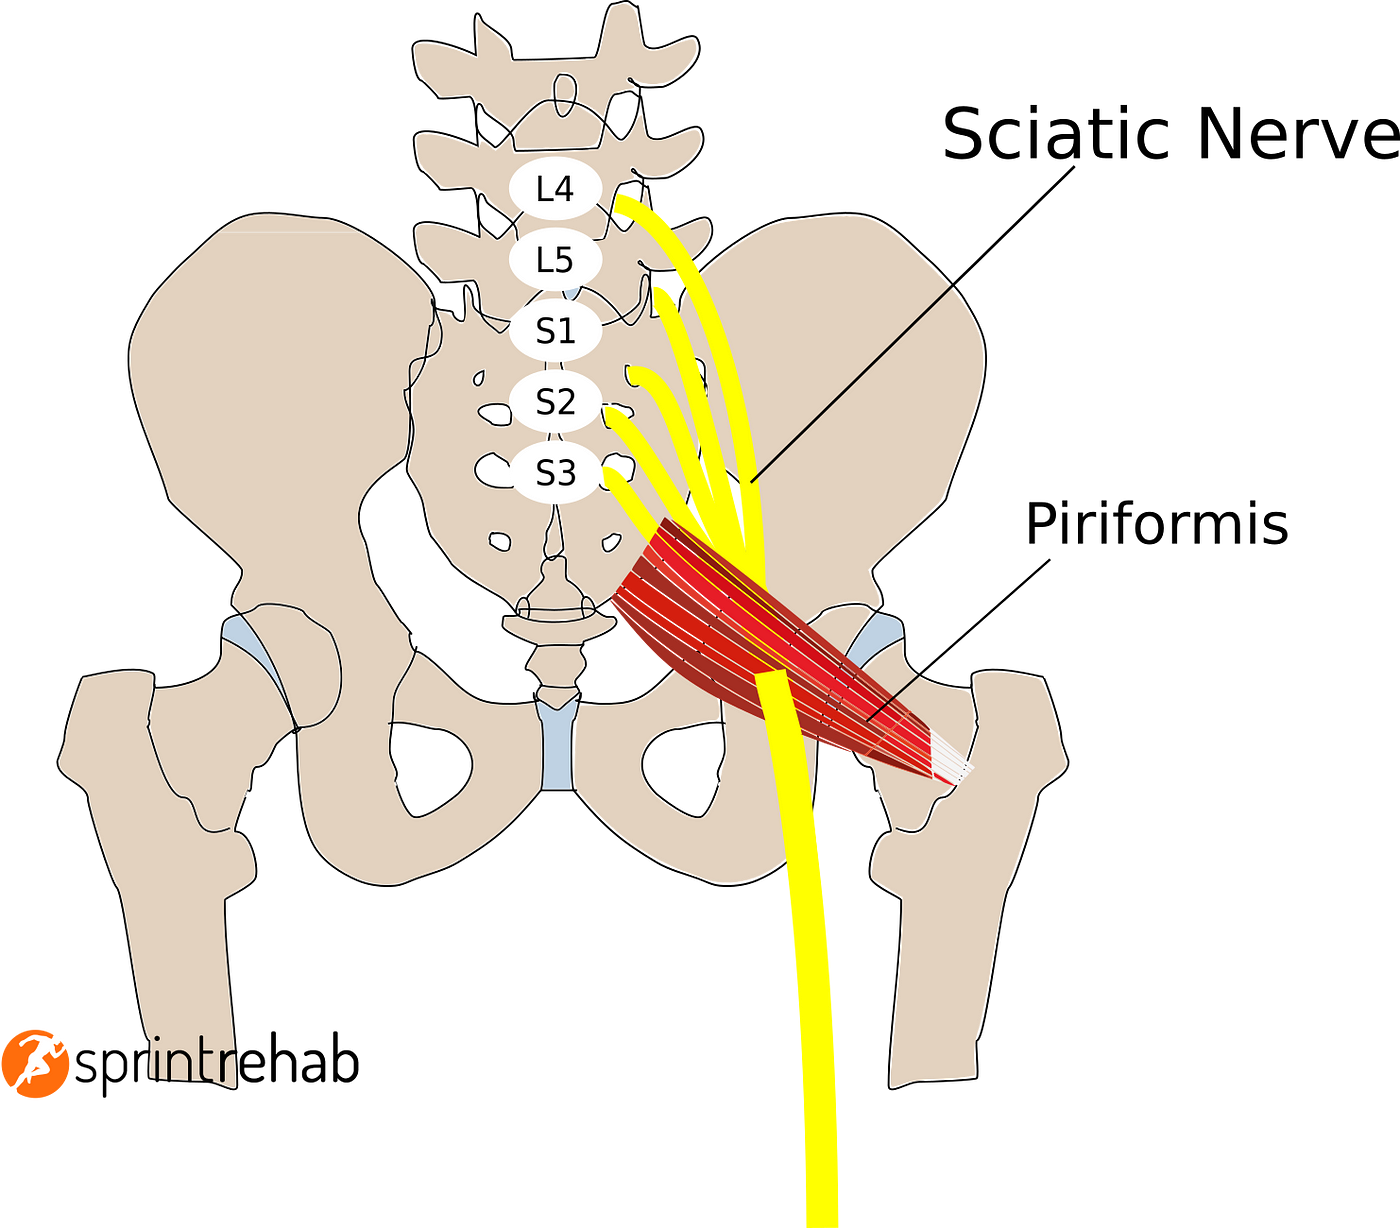 Massage Therapy For Sciatic Pain – Your Comprehensive Quick Guide to Relief  - Body Science Therapy